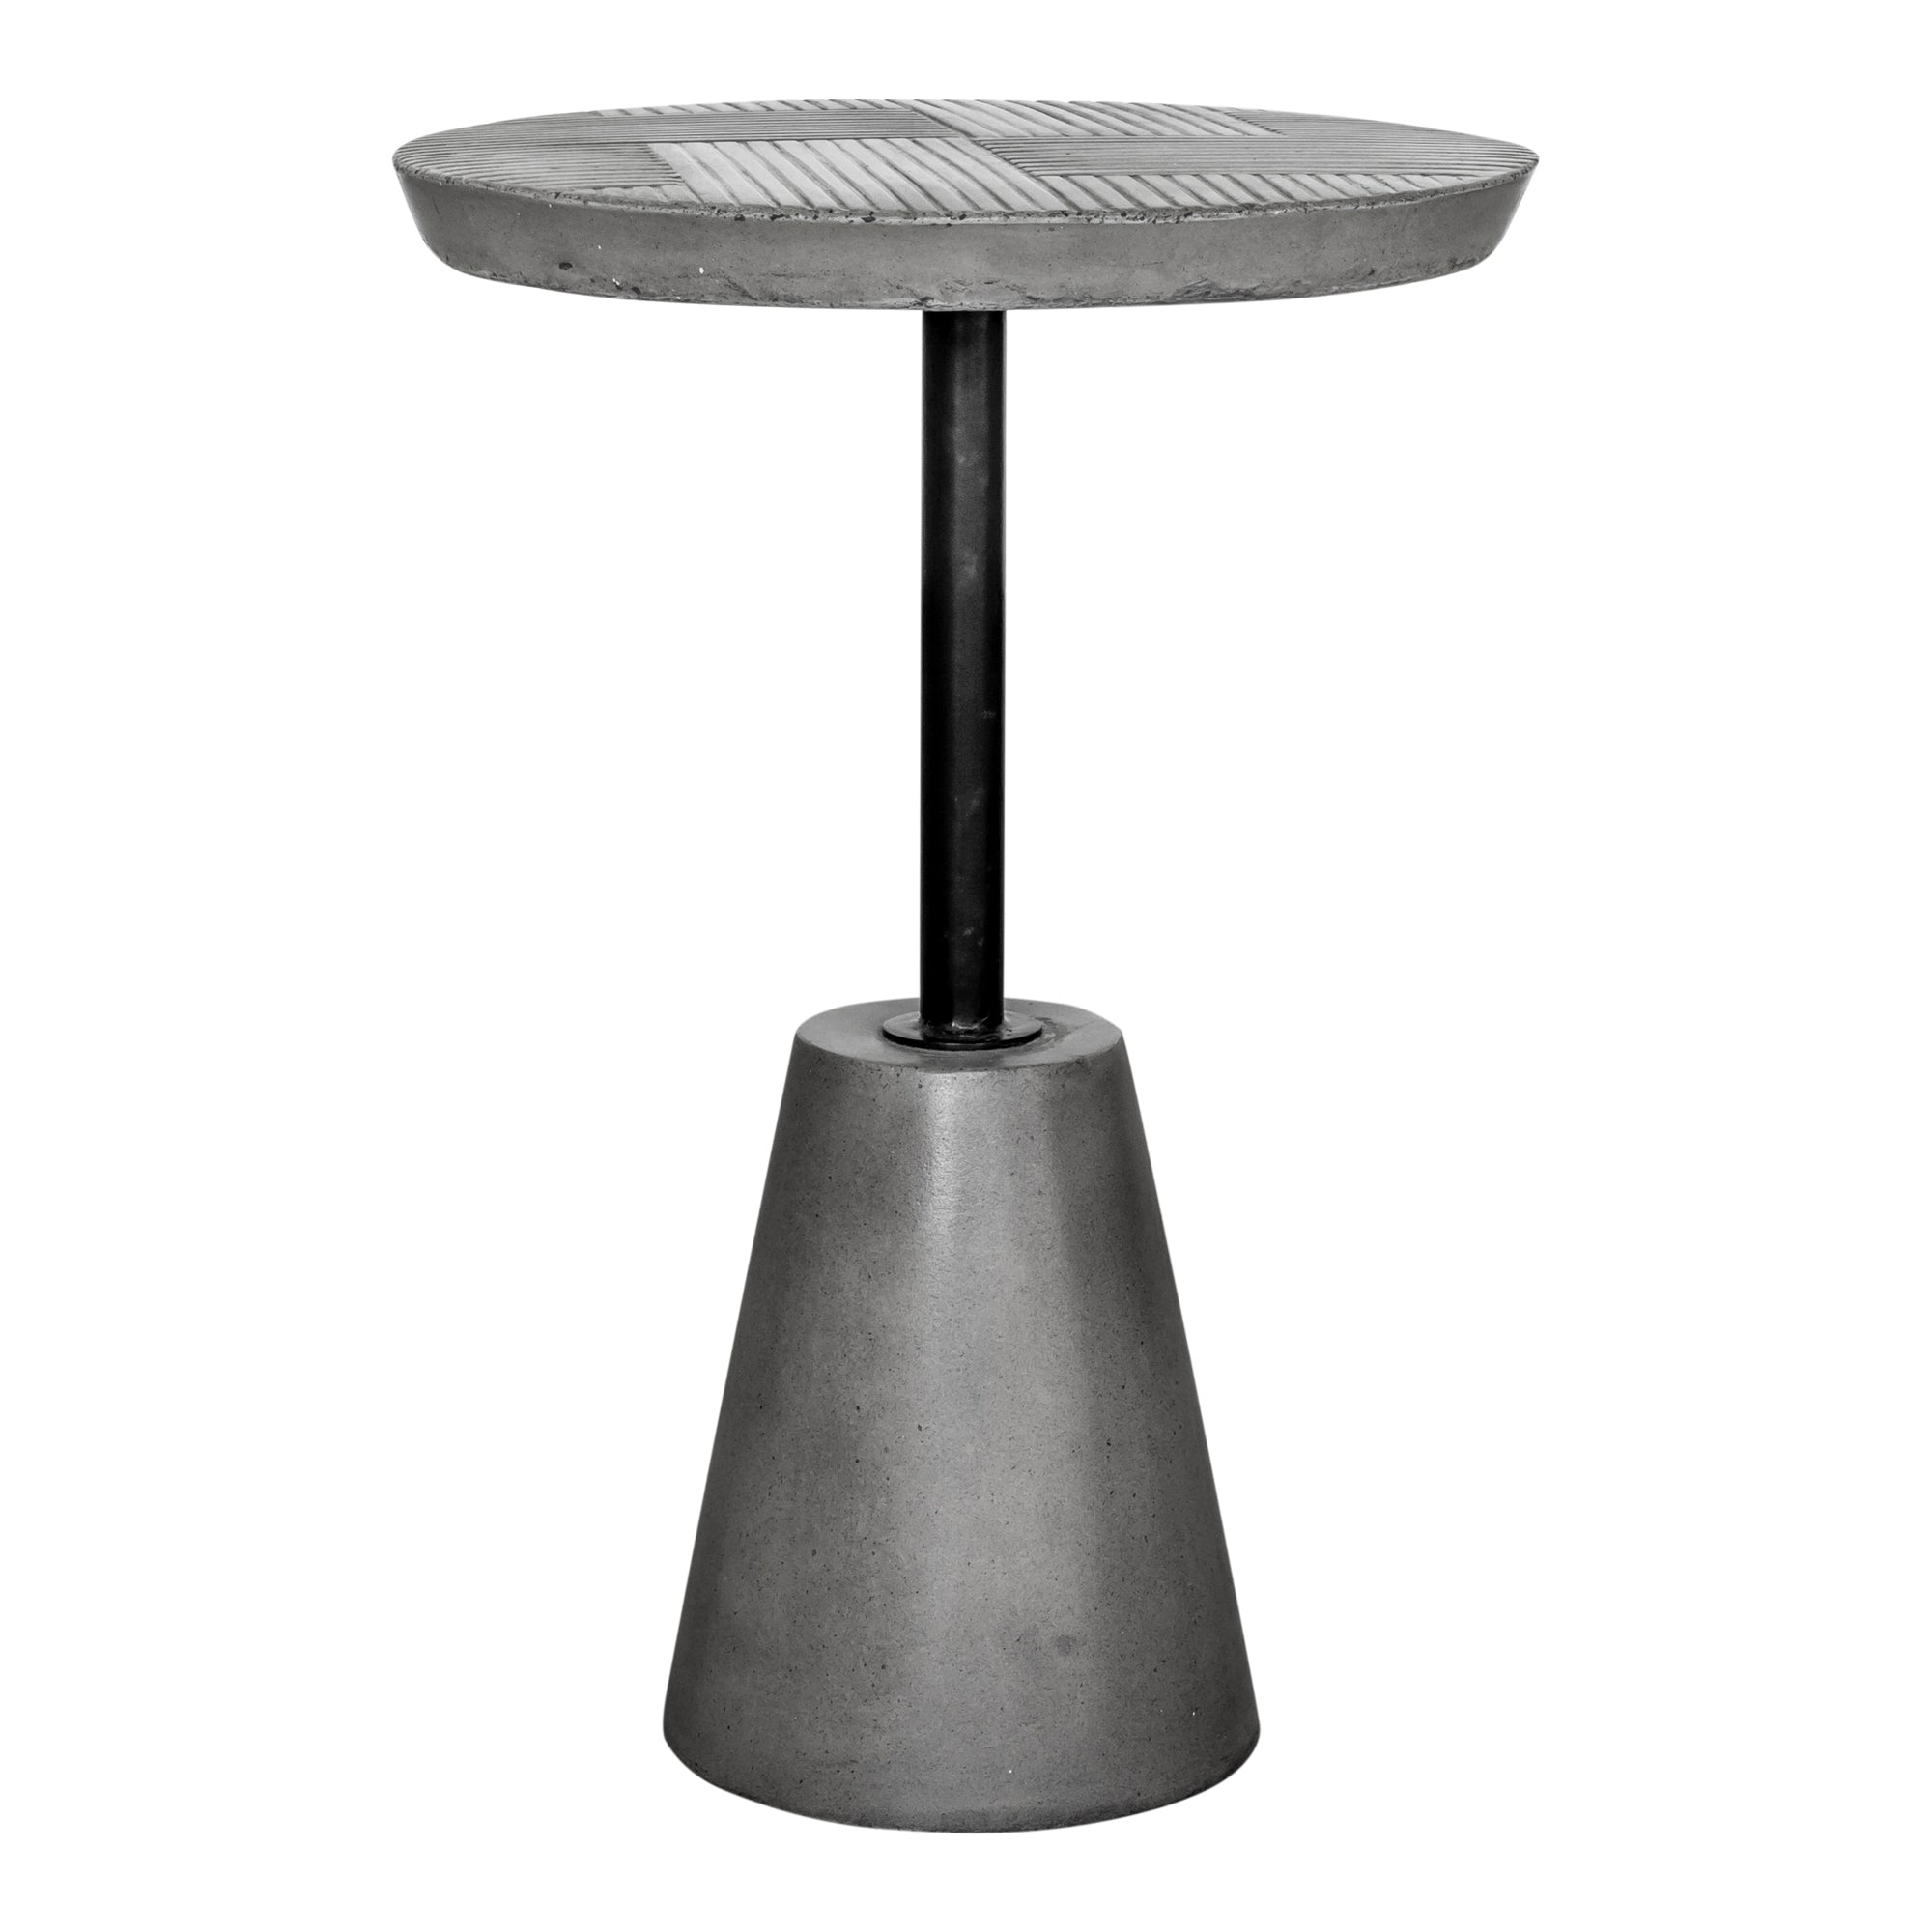 Foundation Outdoor Accent Table